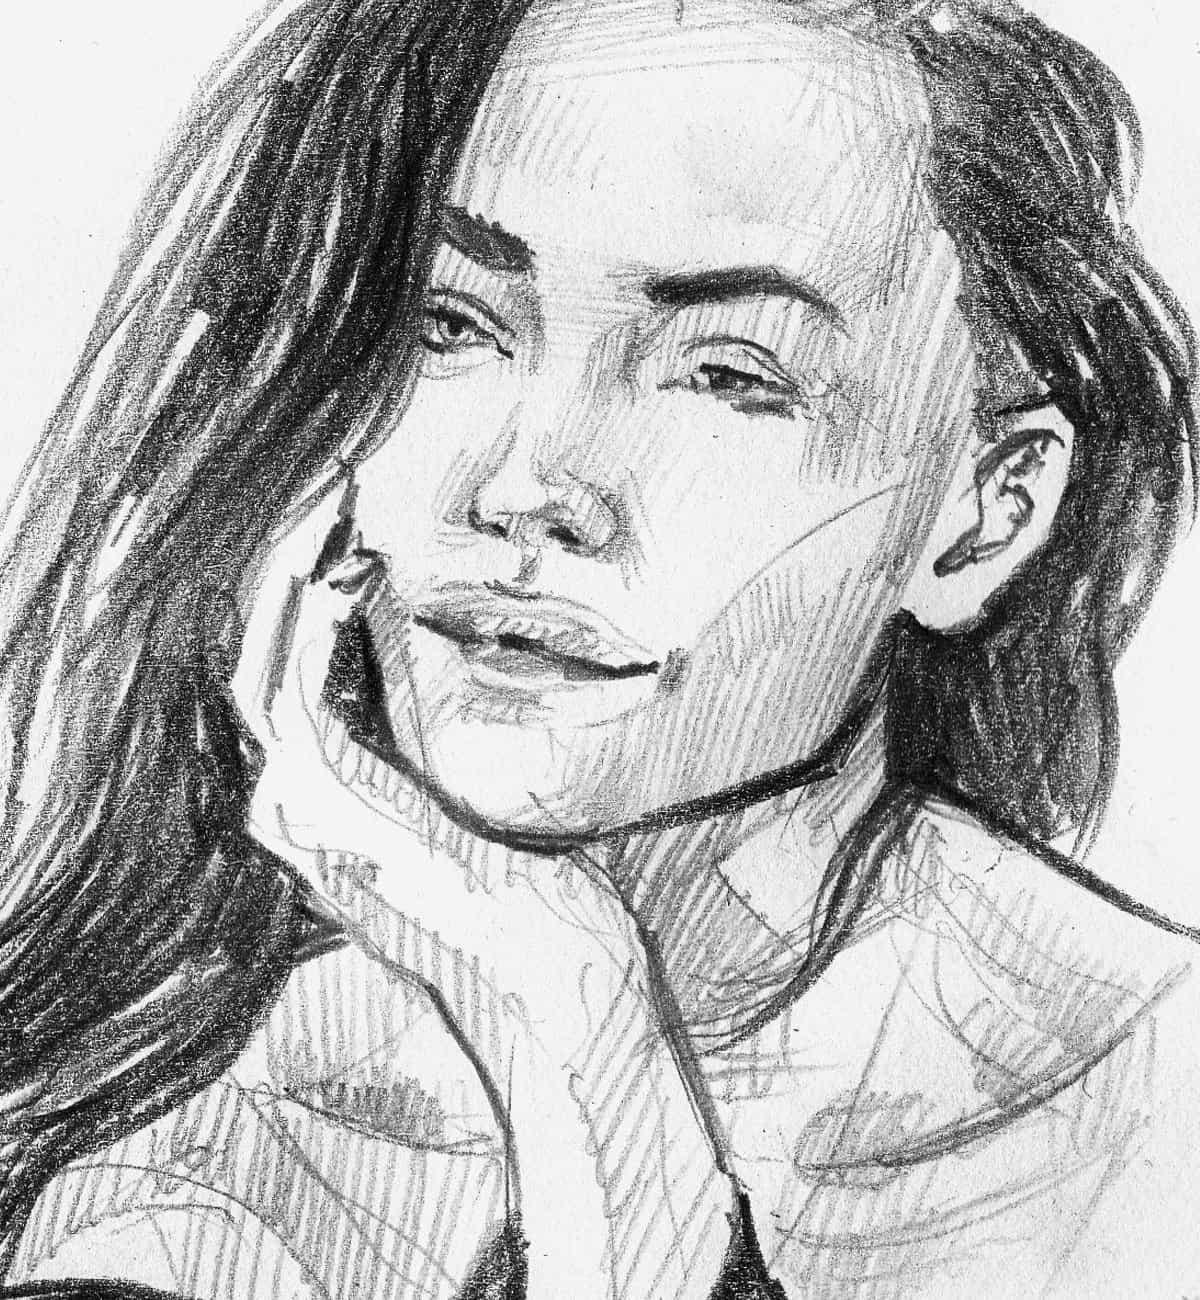 Pencil sketch of the brunette woman